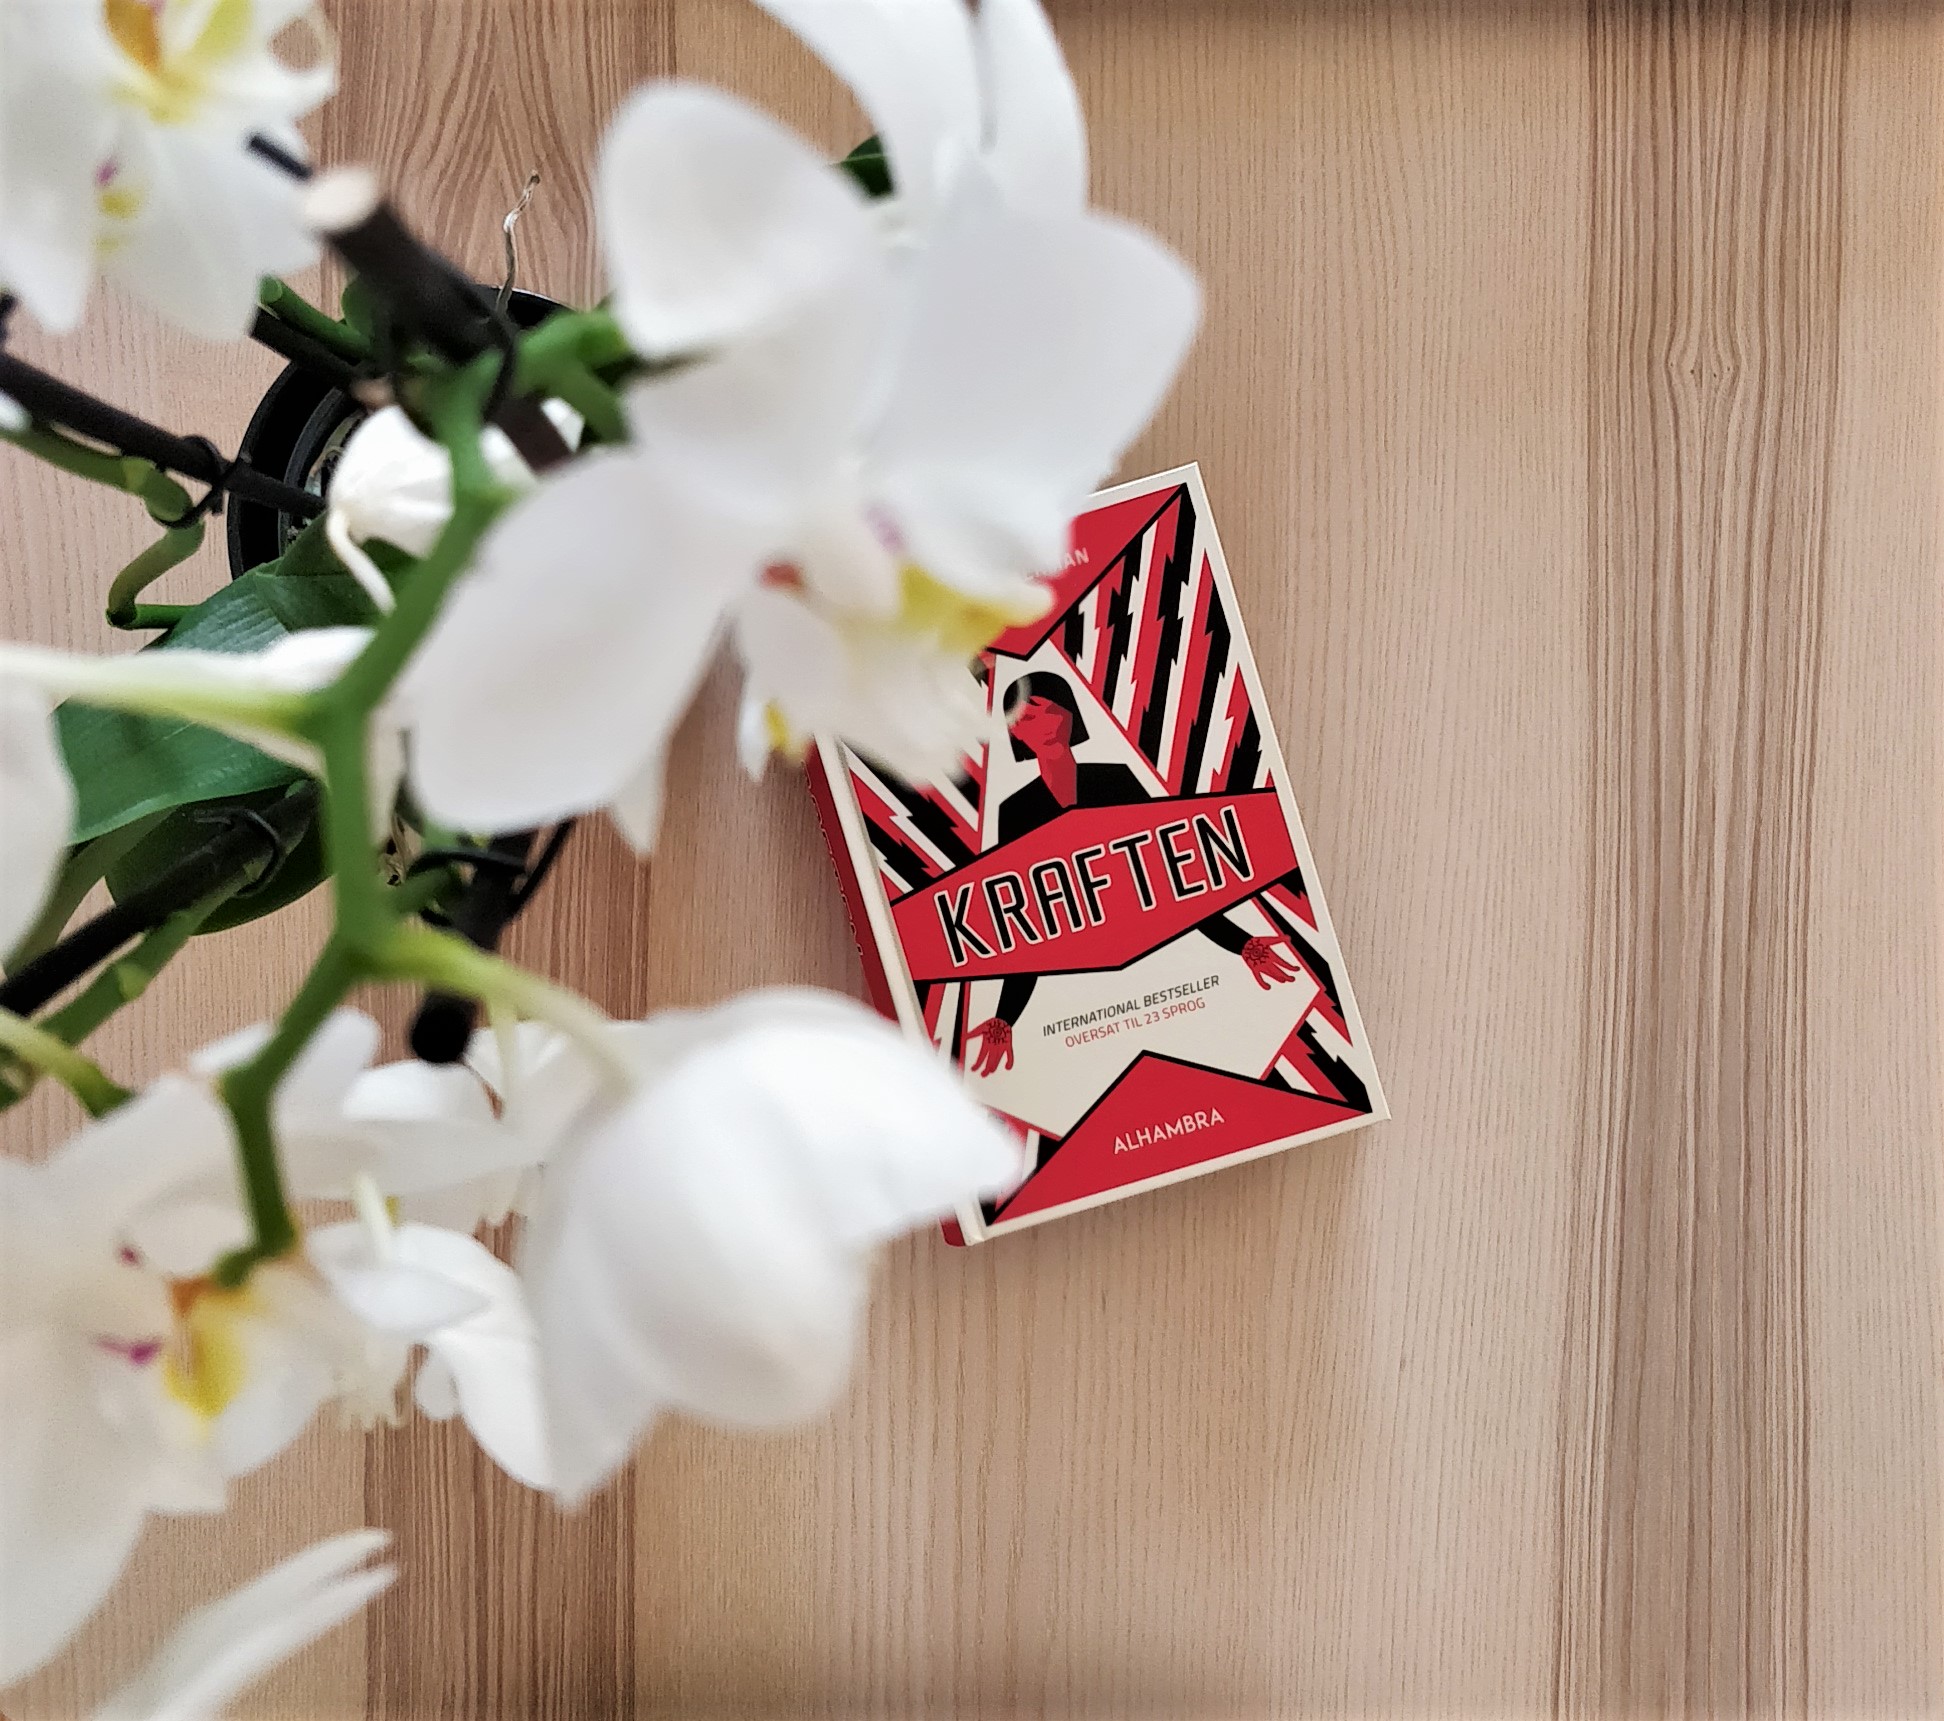 The Danish edition of The Power by Naomi Alderman on a wooden desk.